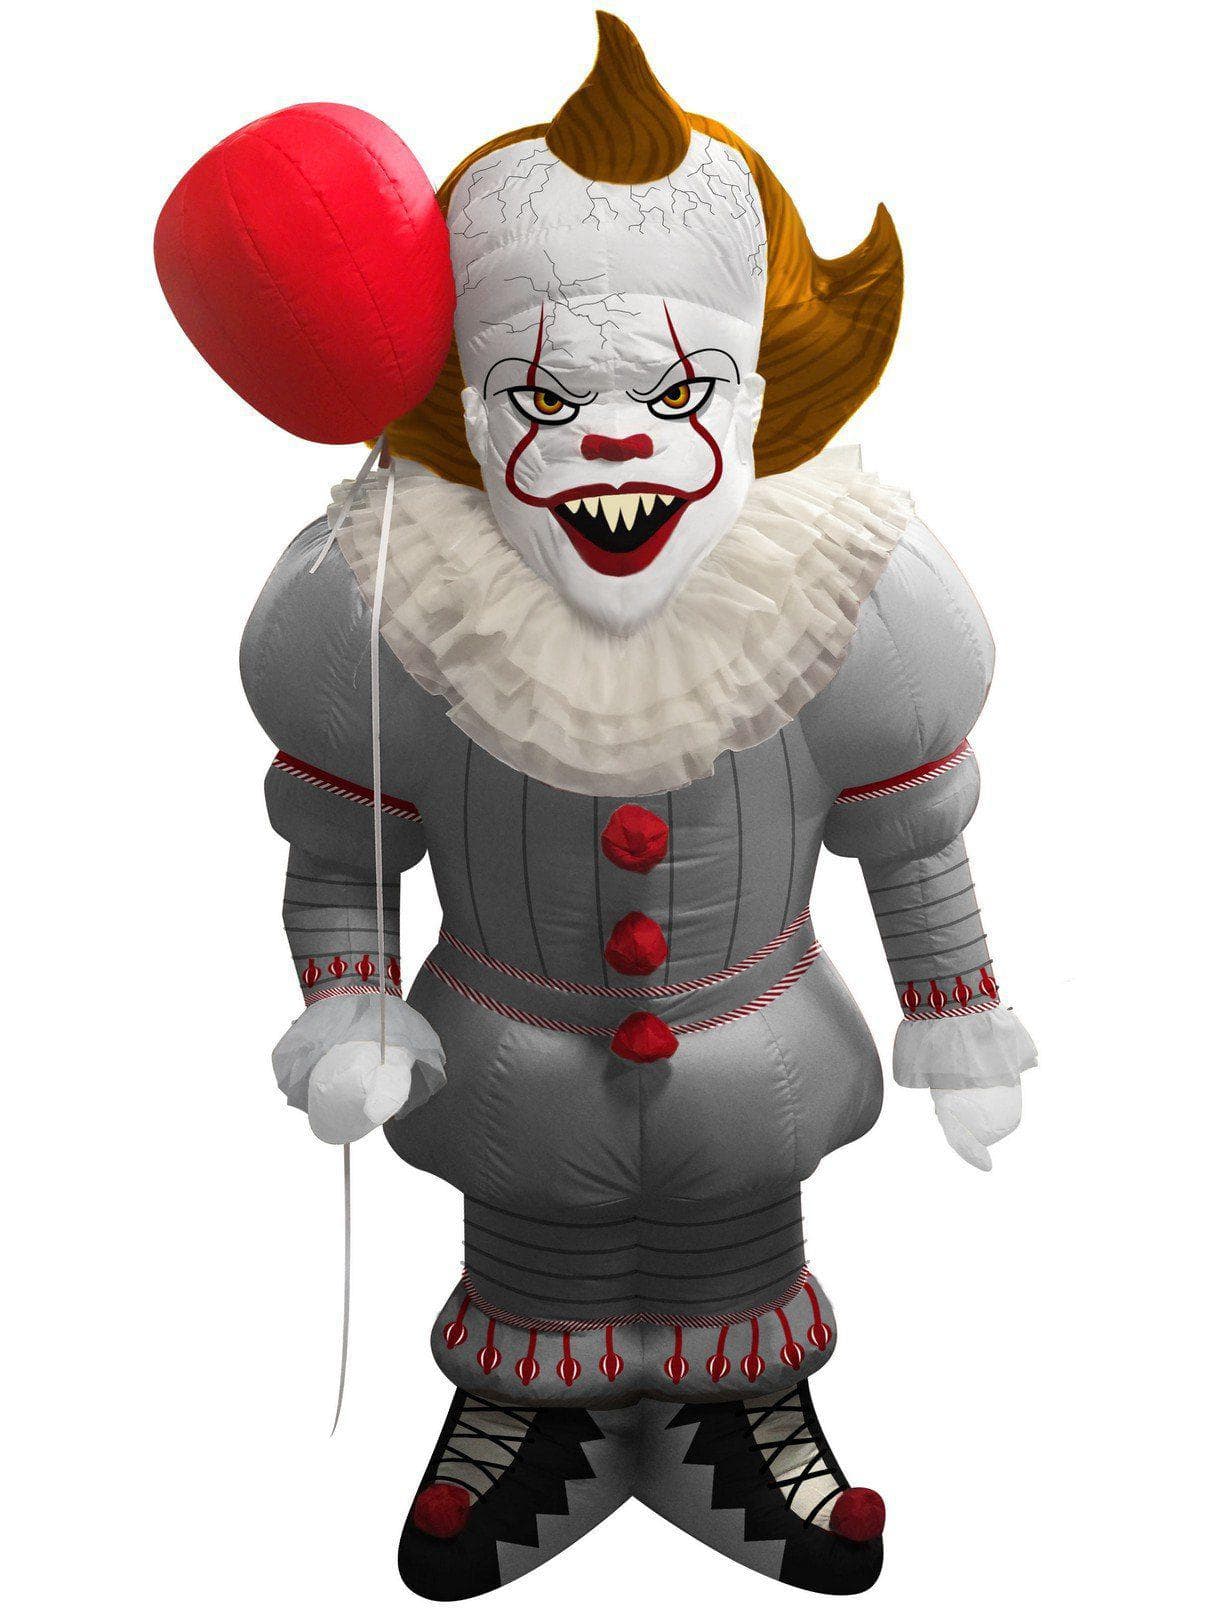 7 Foot IT Pennywise Light Up Inflatable Lawn Decoration - 2017 Movie - costumes.com